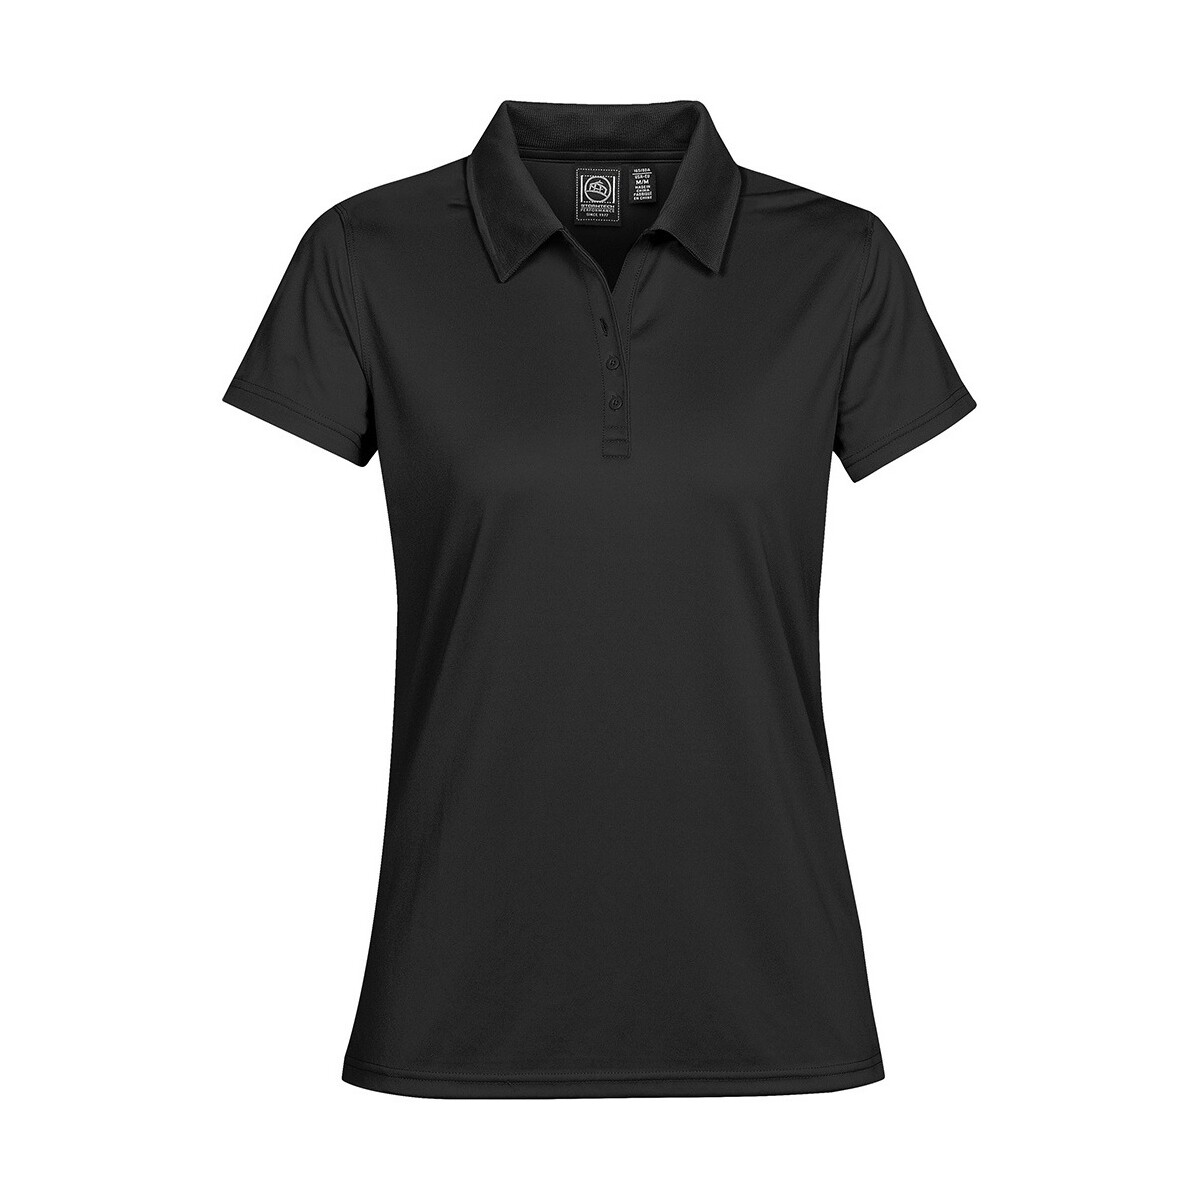 textil Mujer Tops y Camisetas Stormtech Eclipse Negro